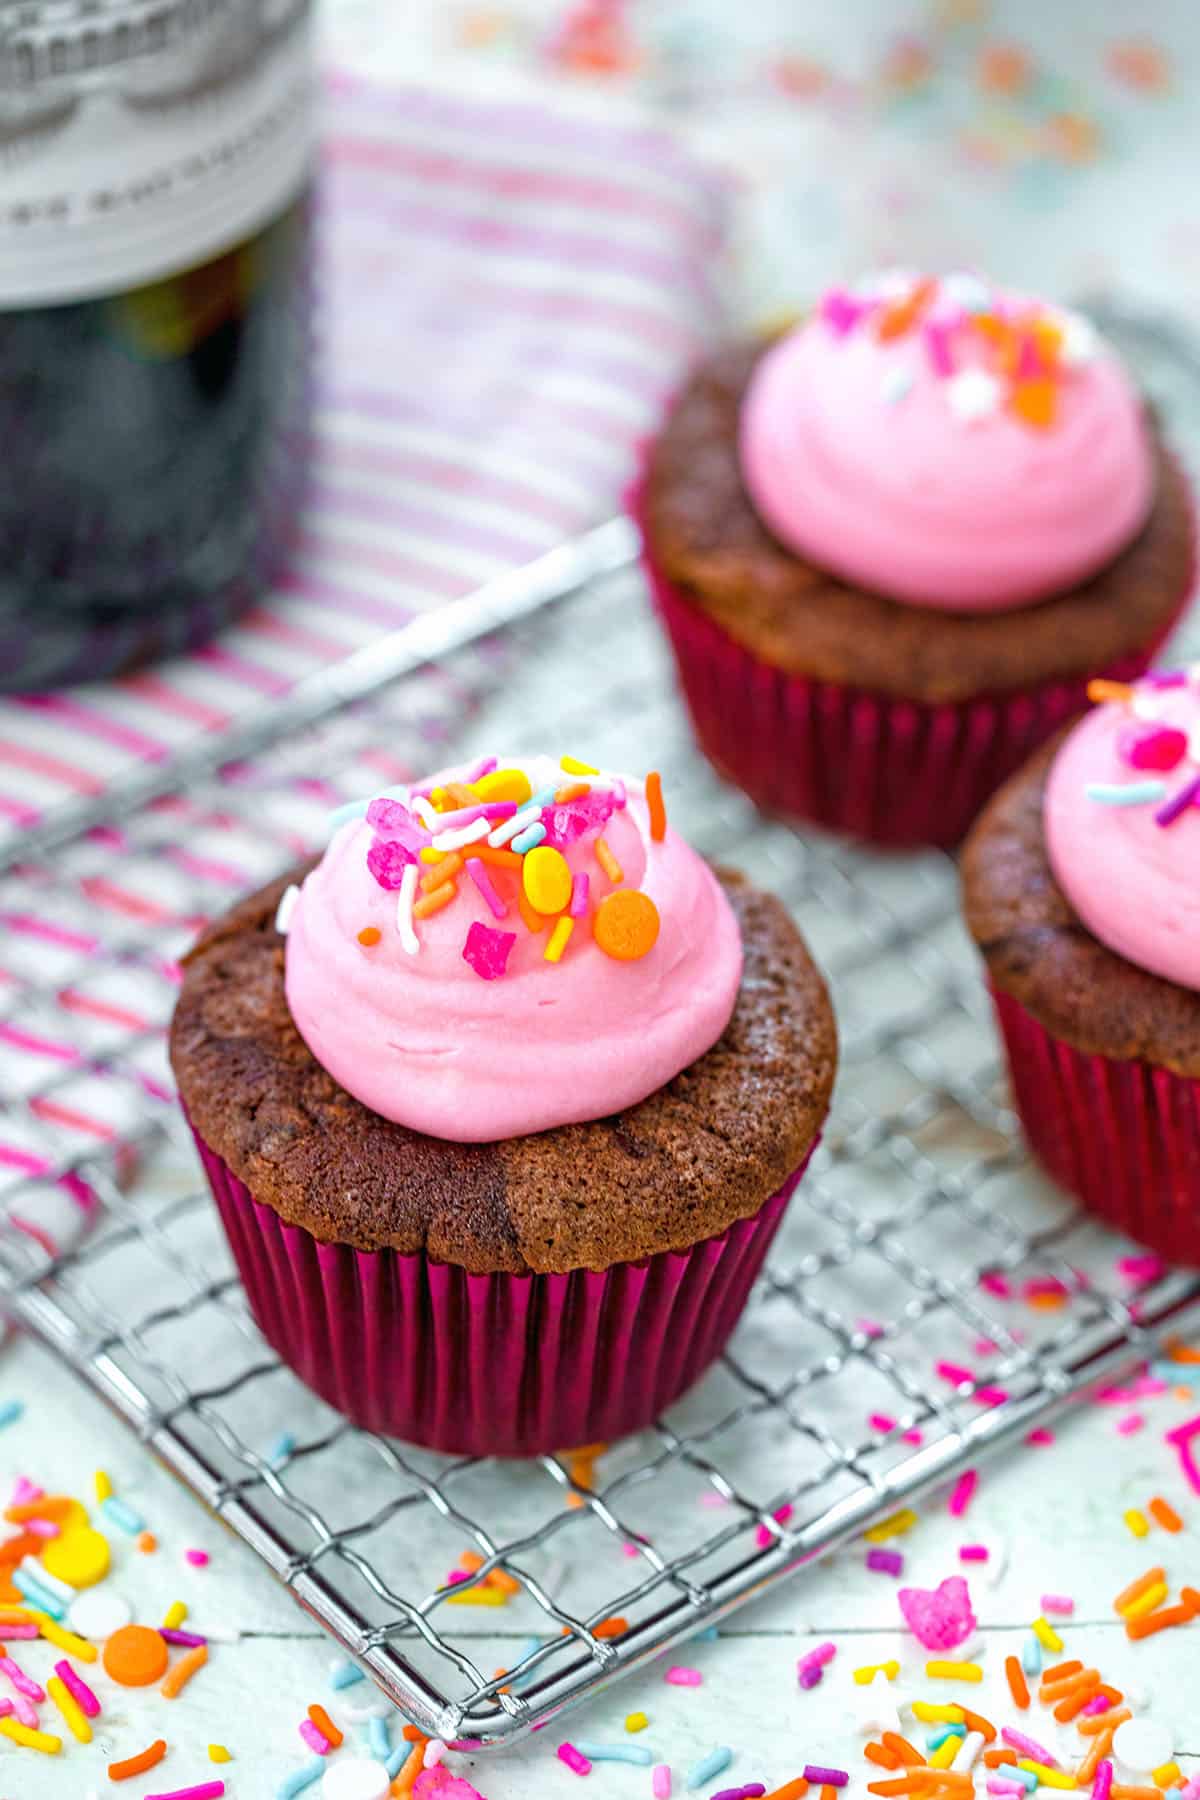 Head-on view of a red wine cupcake with pink frosting and sprinkles on a baking rack with more cupcakes and sprinkles in the background.